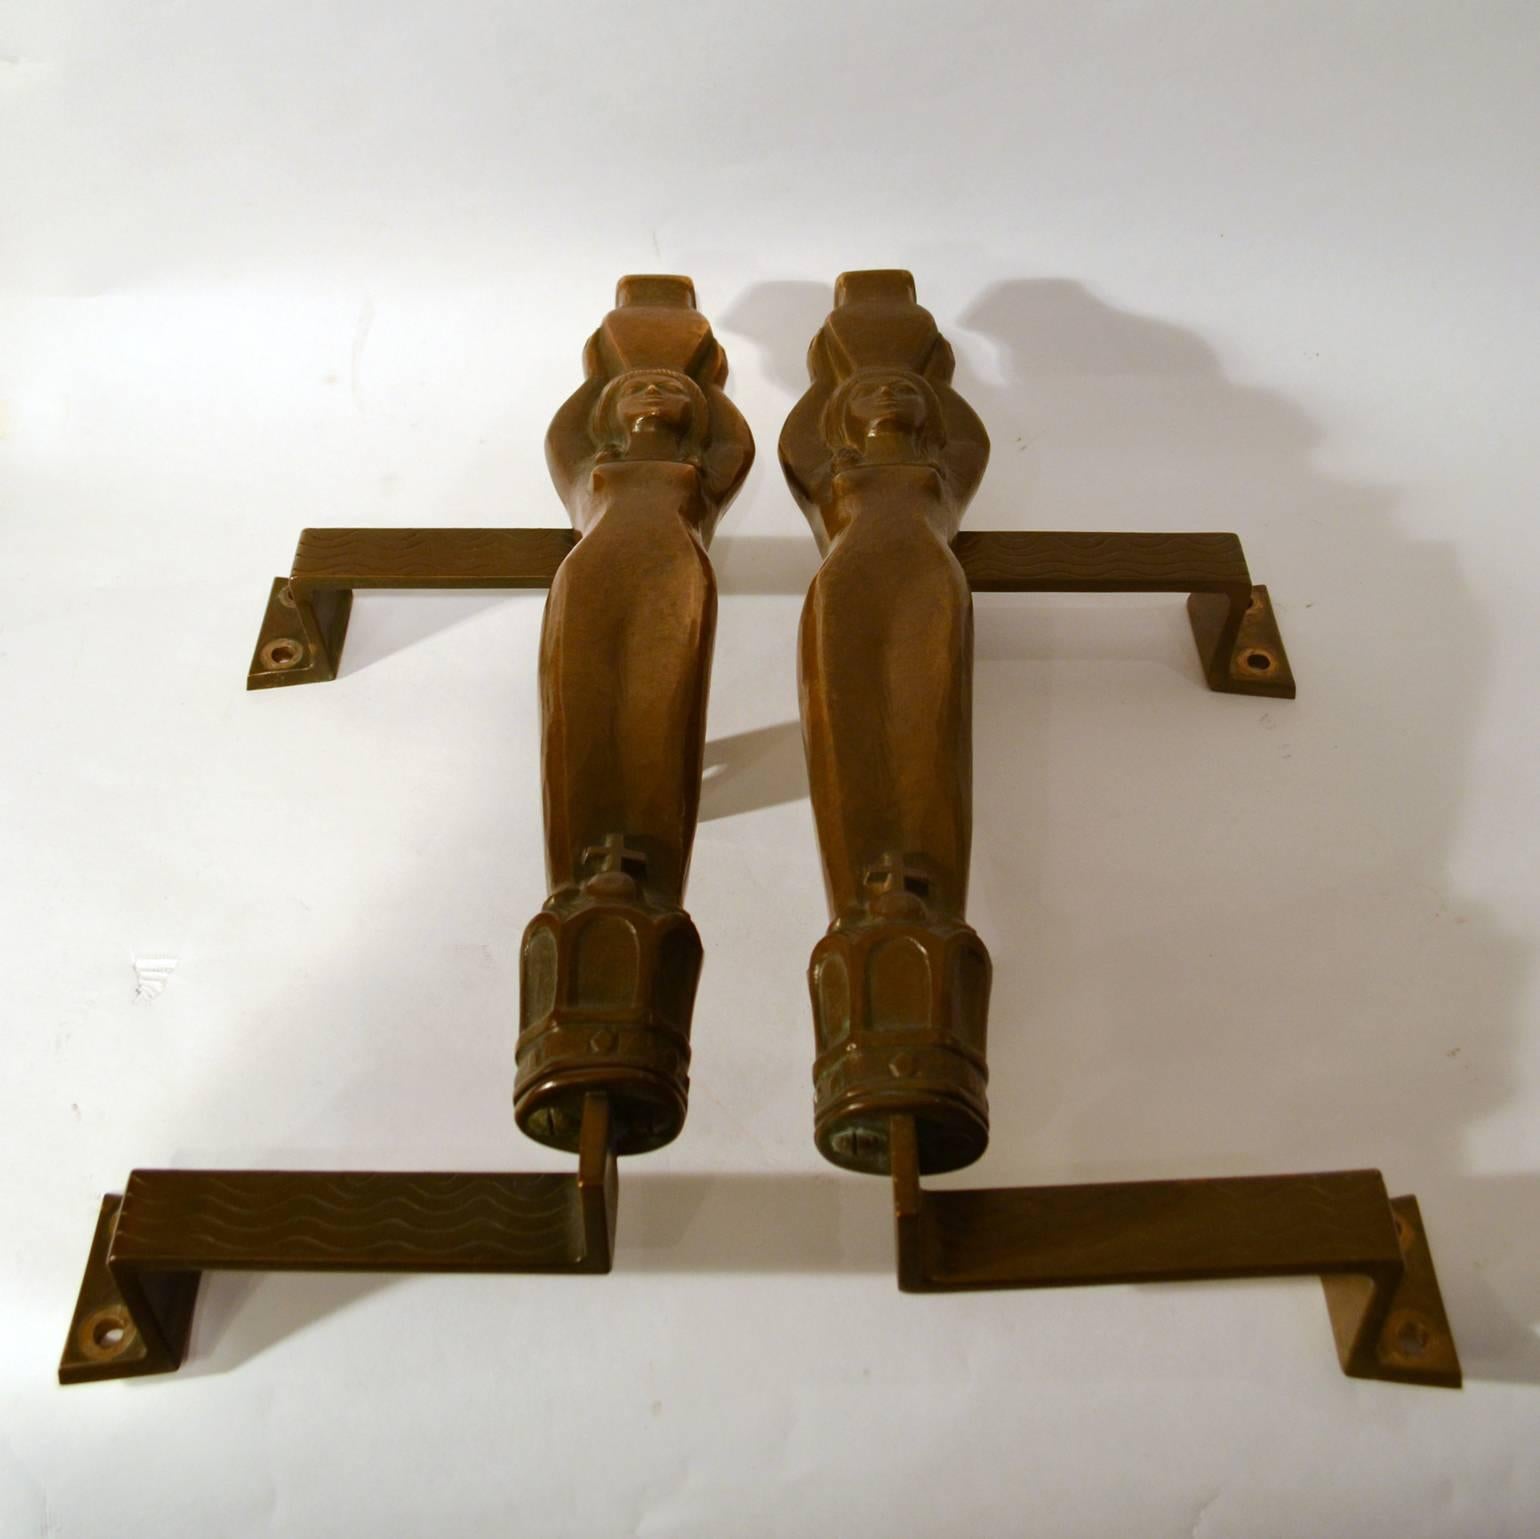 Original pair of door handles in the shape of two water nymphs, from spa in the Alps.
The nymphs carry water jugs on their heads and stand on crowns. These large patinated bronze push & pull door handles are decorated with waves where they meet the